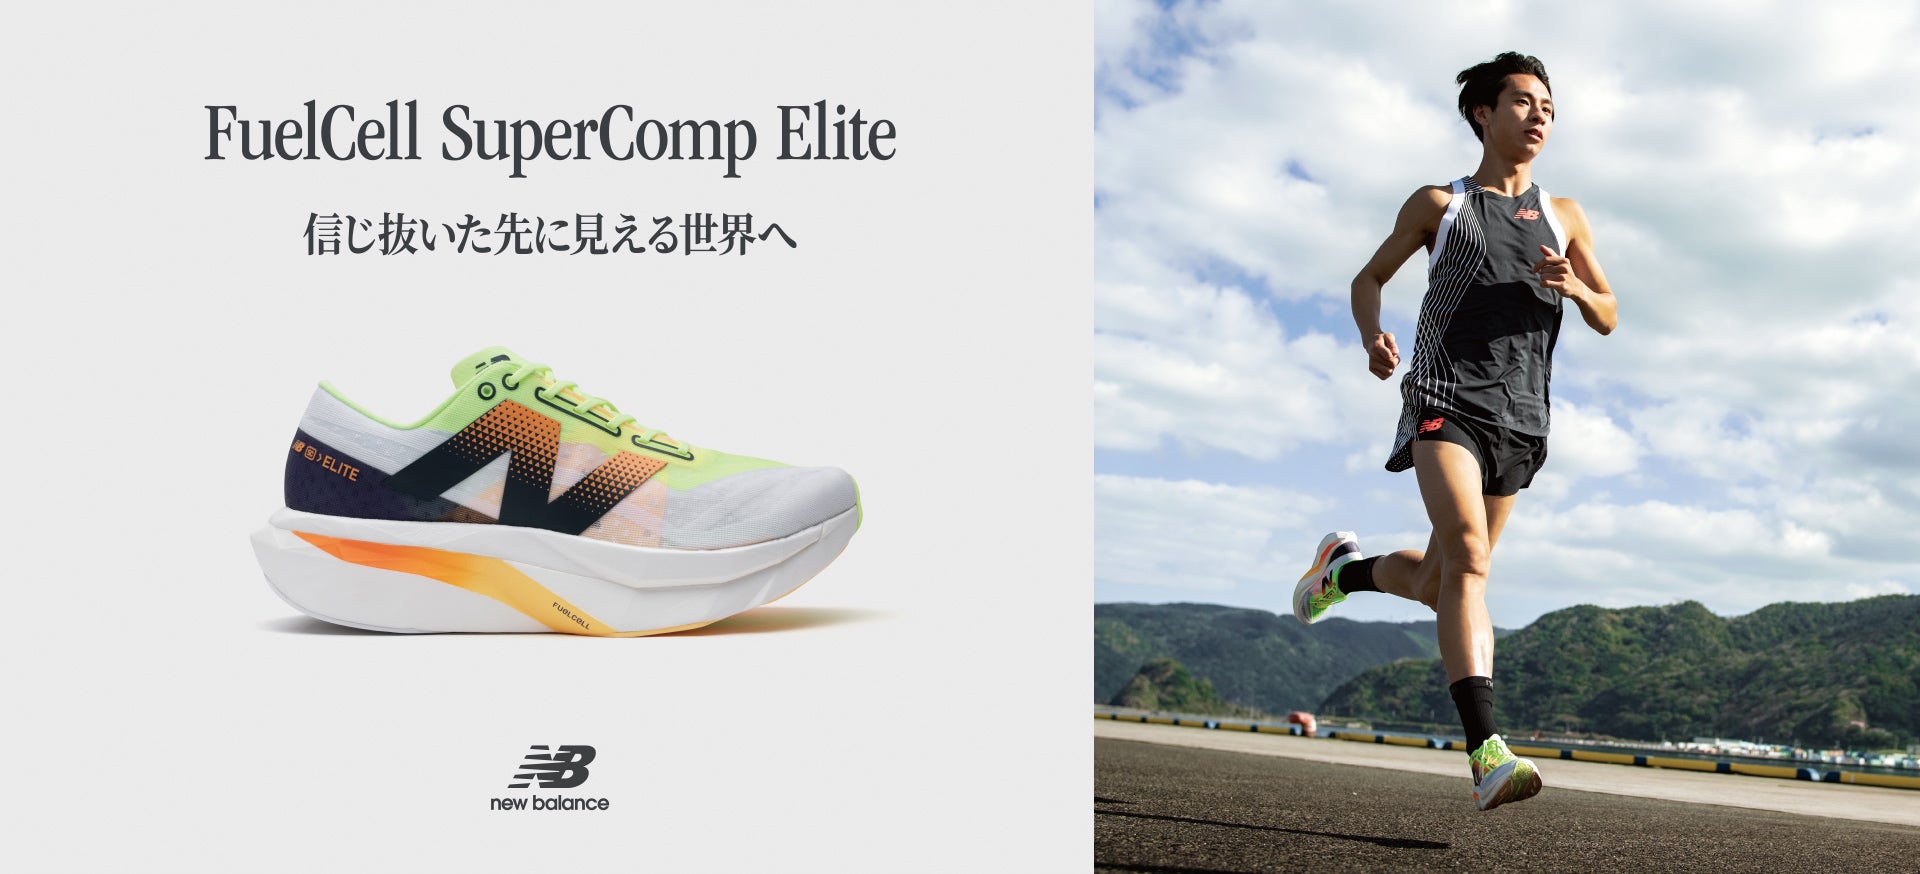 FuelCell SuperComp Elite - A world that you can see if you believe in it.